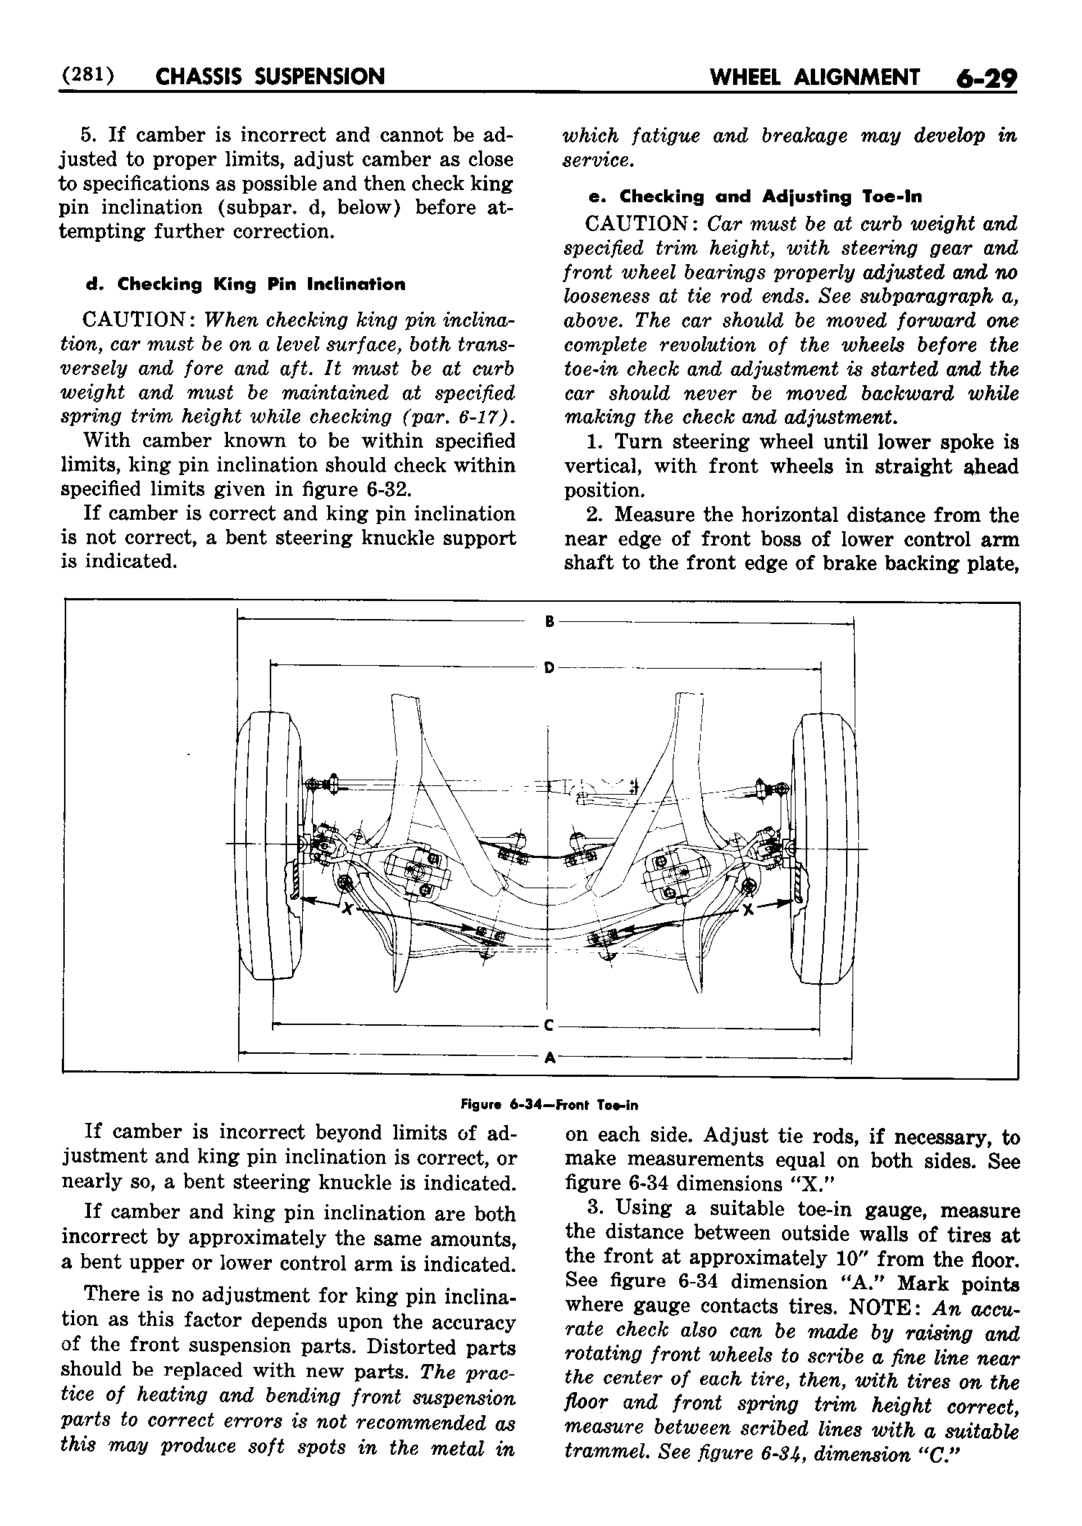 n_07 1952 Buick Shop Manual - Chassis Suspension-029-029.jpg